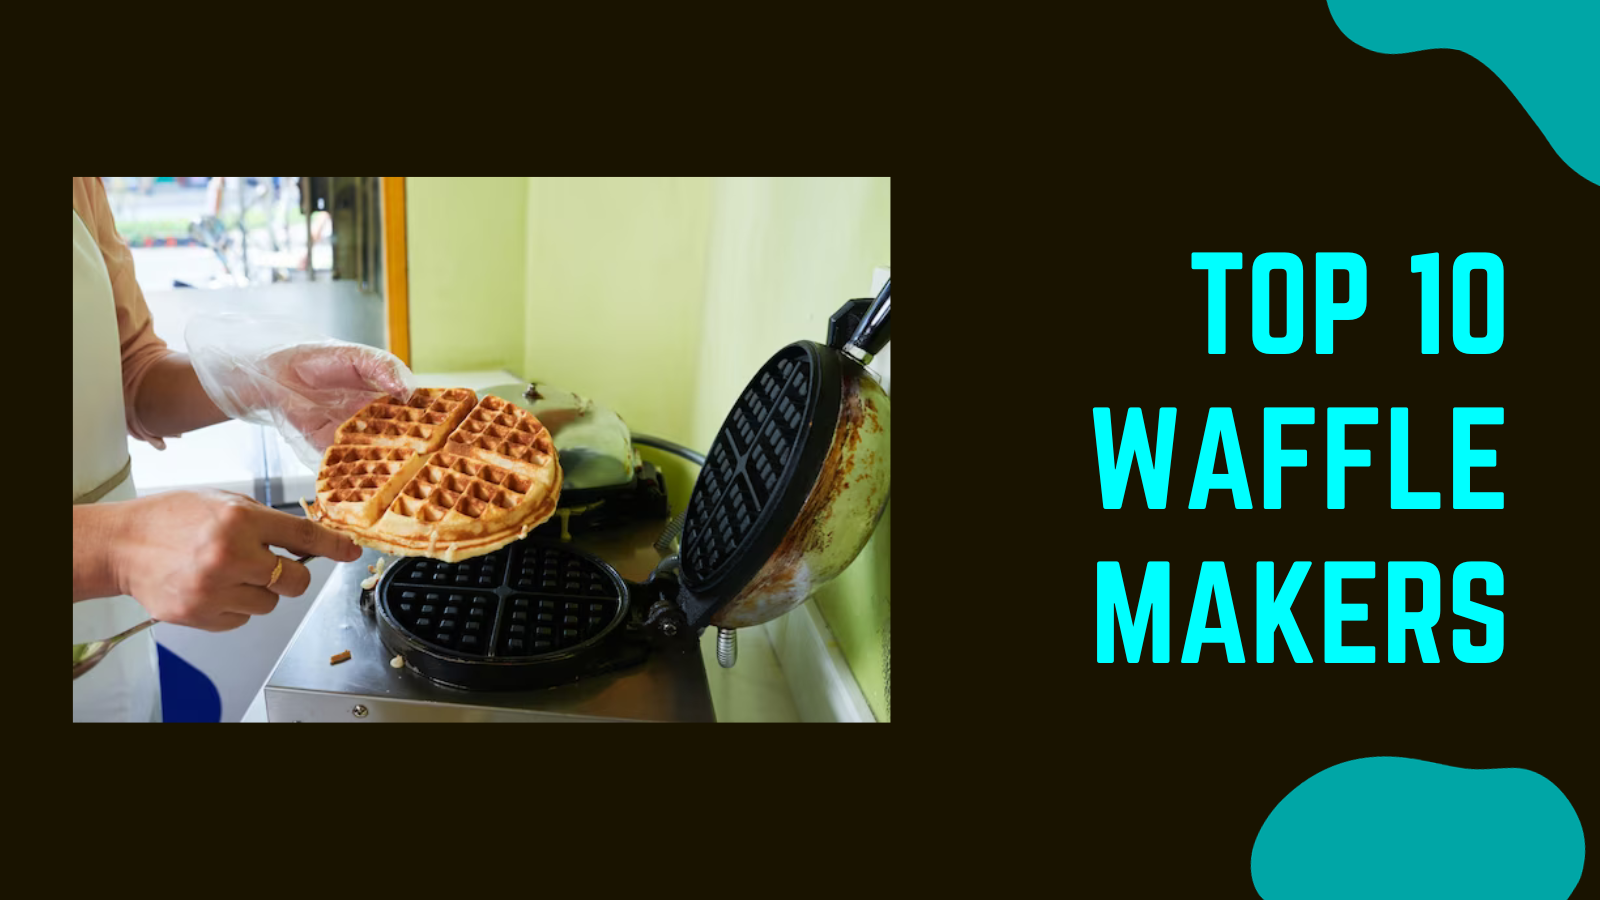 Top 10 waffle makers